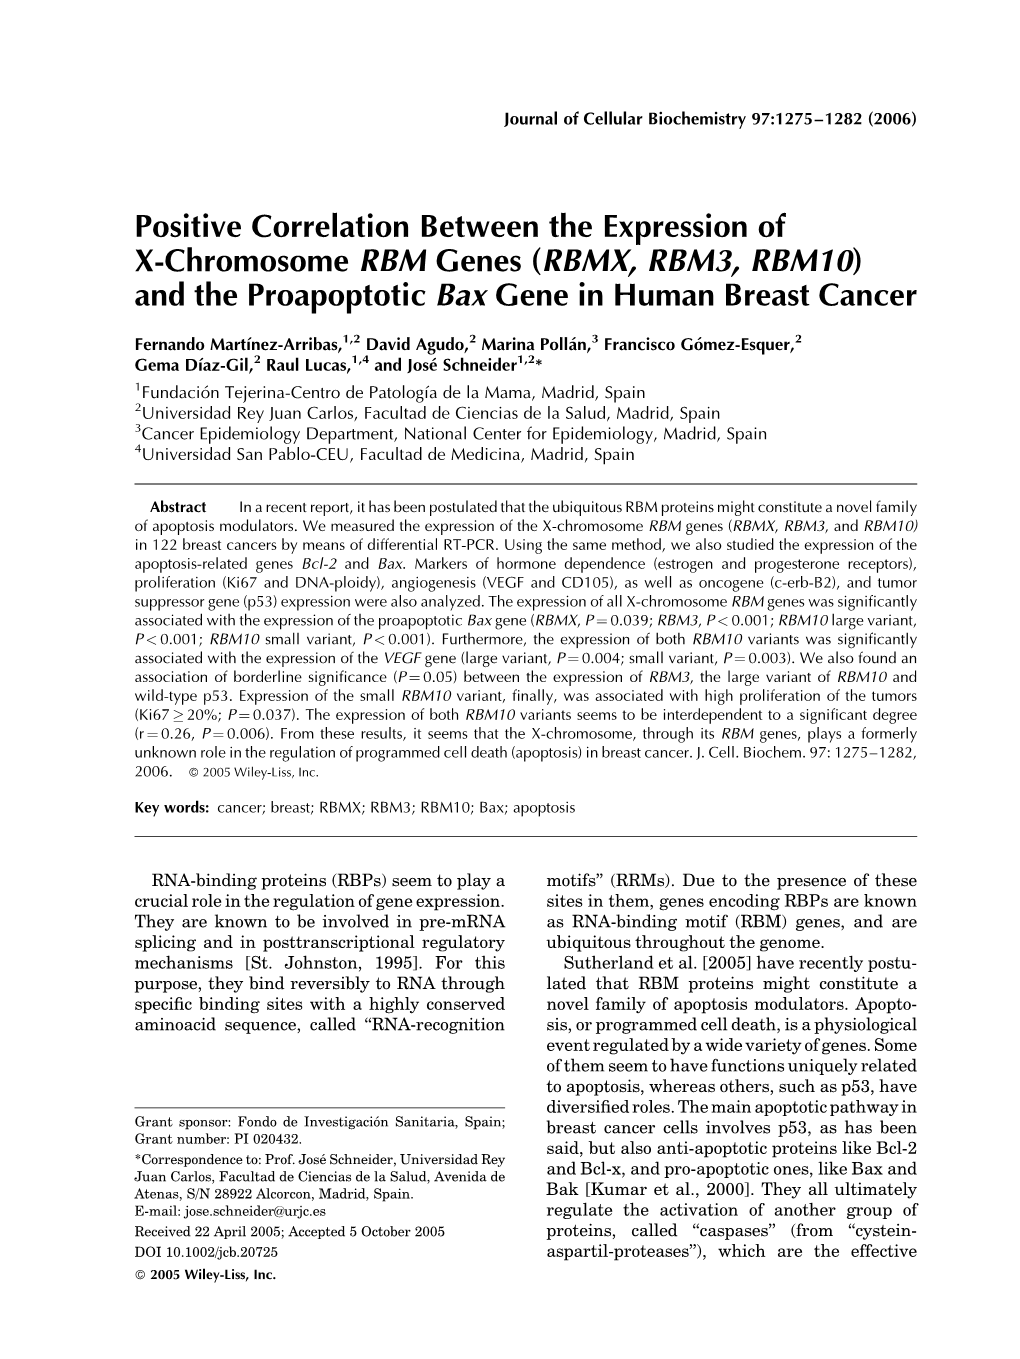 Positive Correlation Between the Expression of X-Chromosome RBM Genes (RBMX, RBM3, RBM10) and the Proapoptotic Bax Gene in Human Breast Cancer